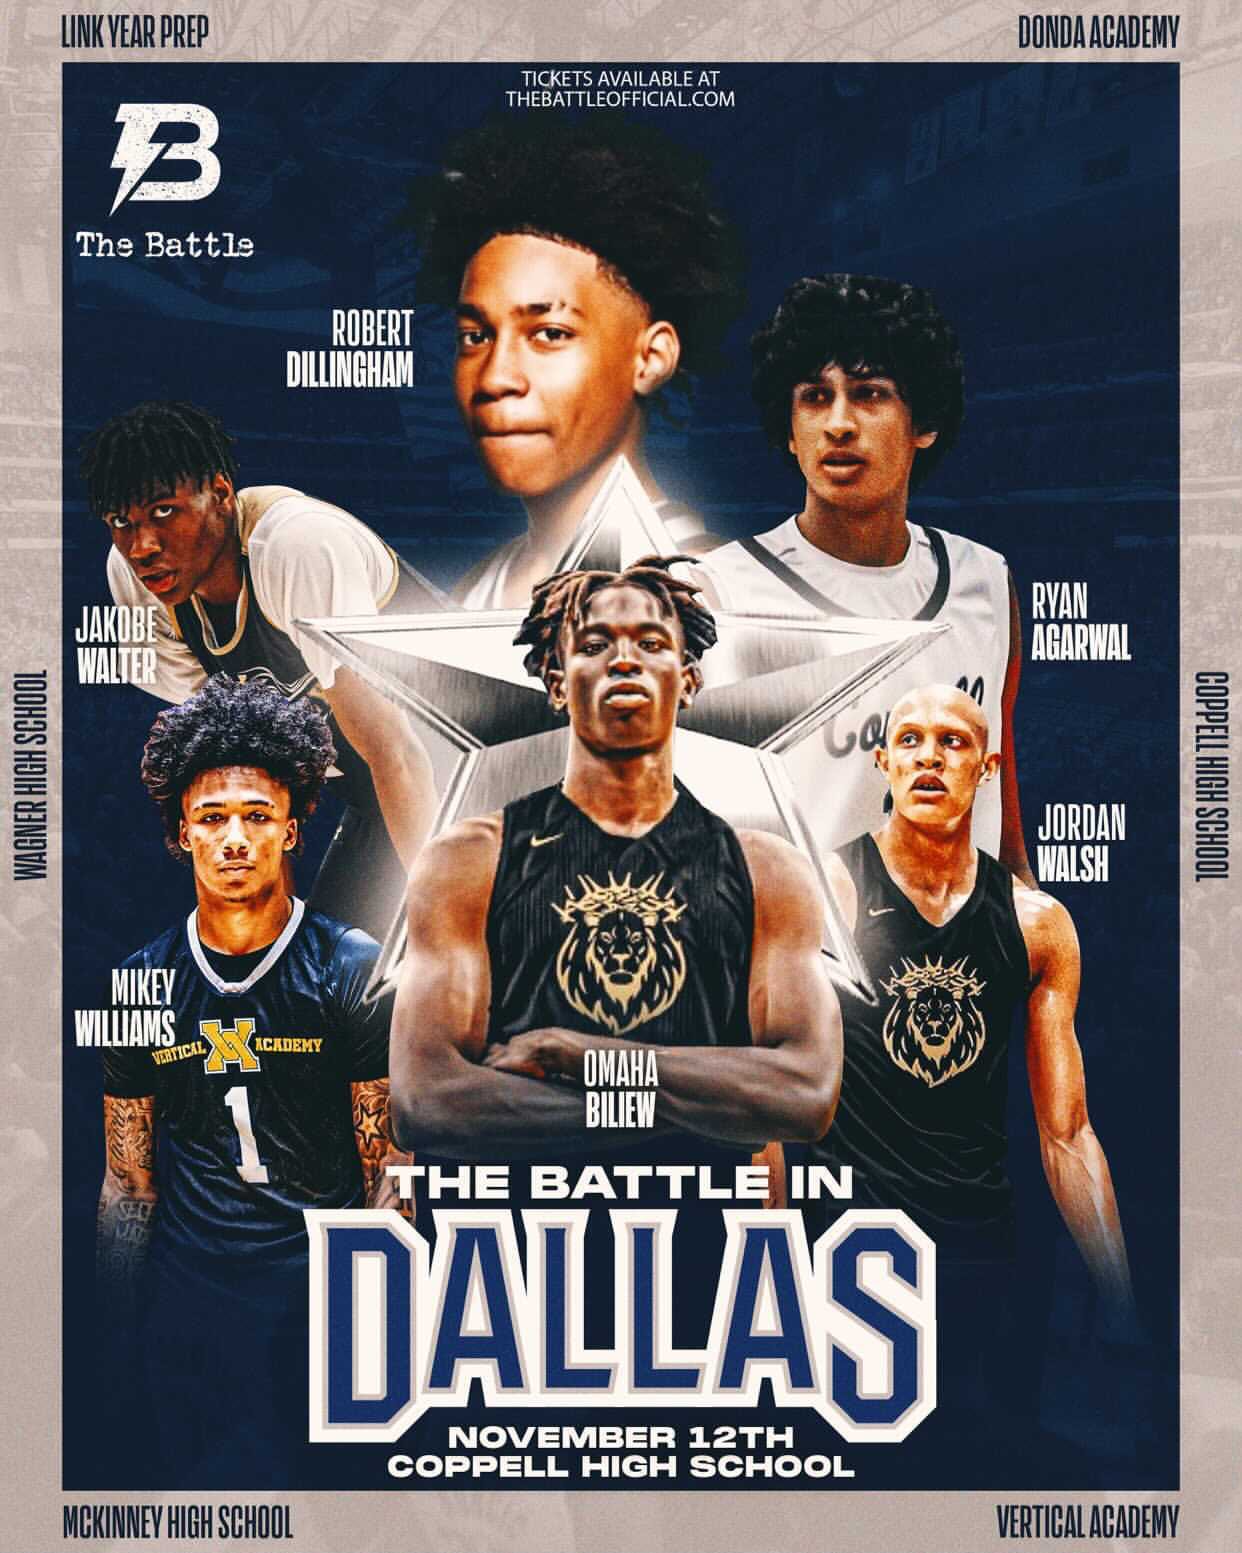 A promotional poster for The Battle in Dallas featuring photographs of six high school basketball players